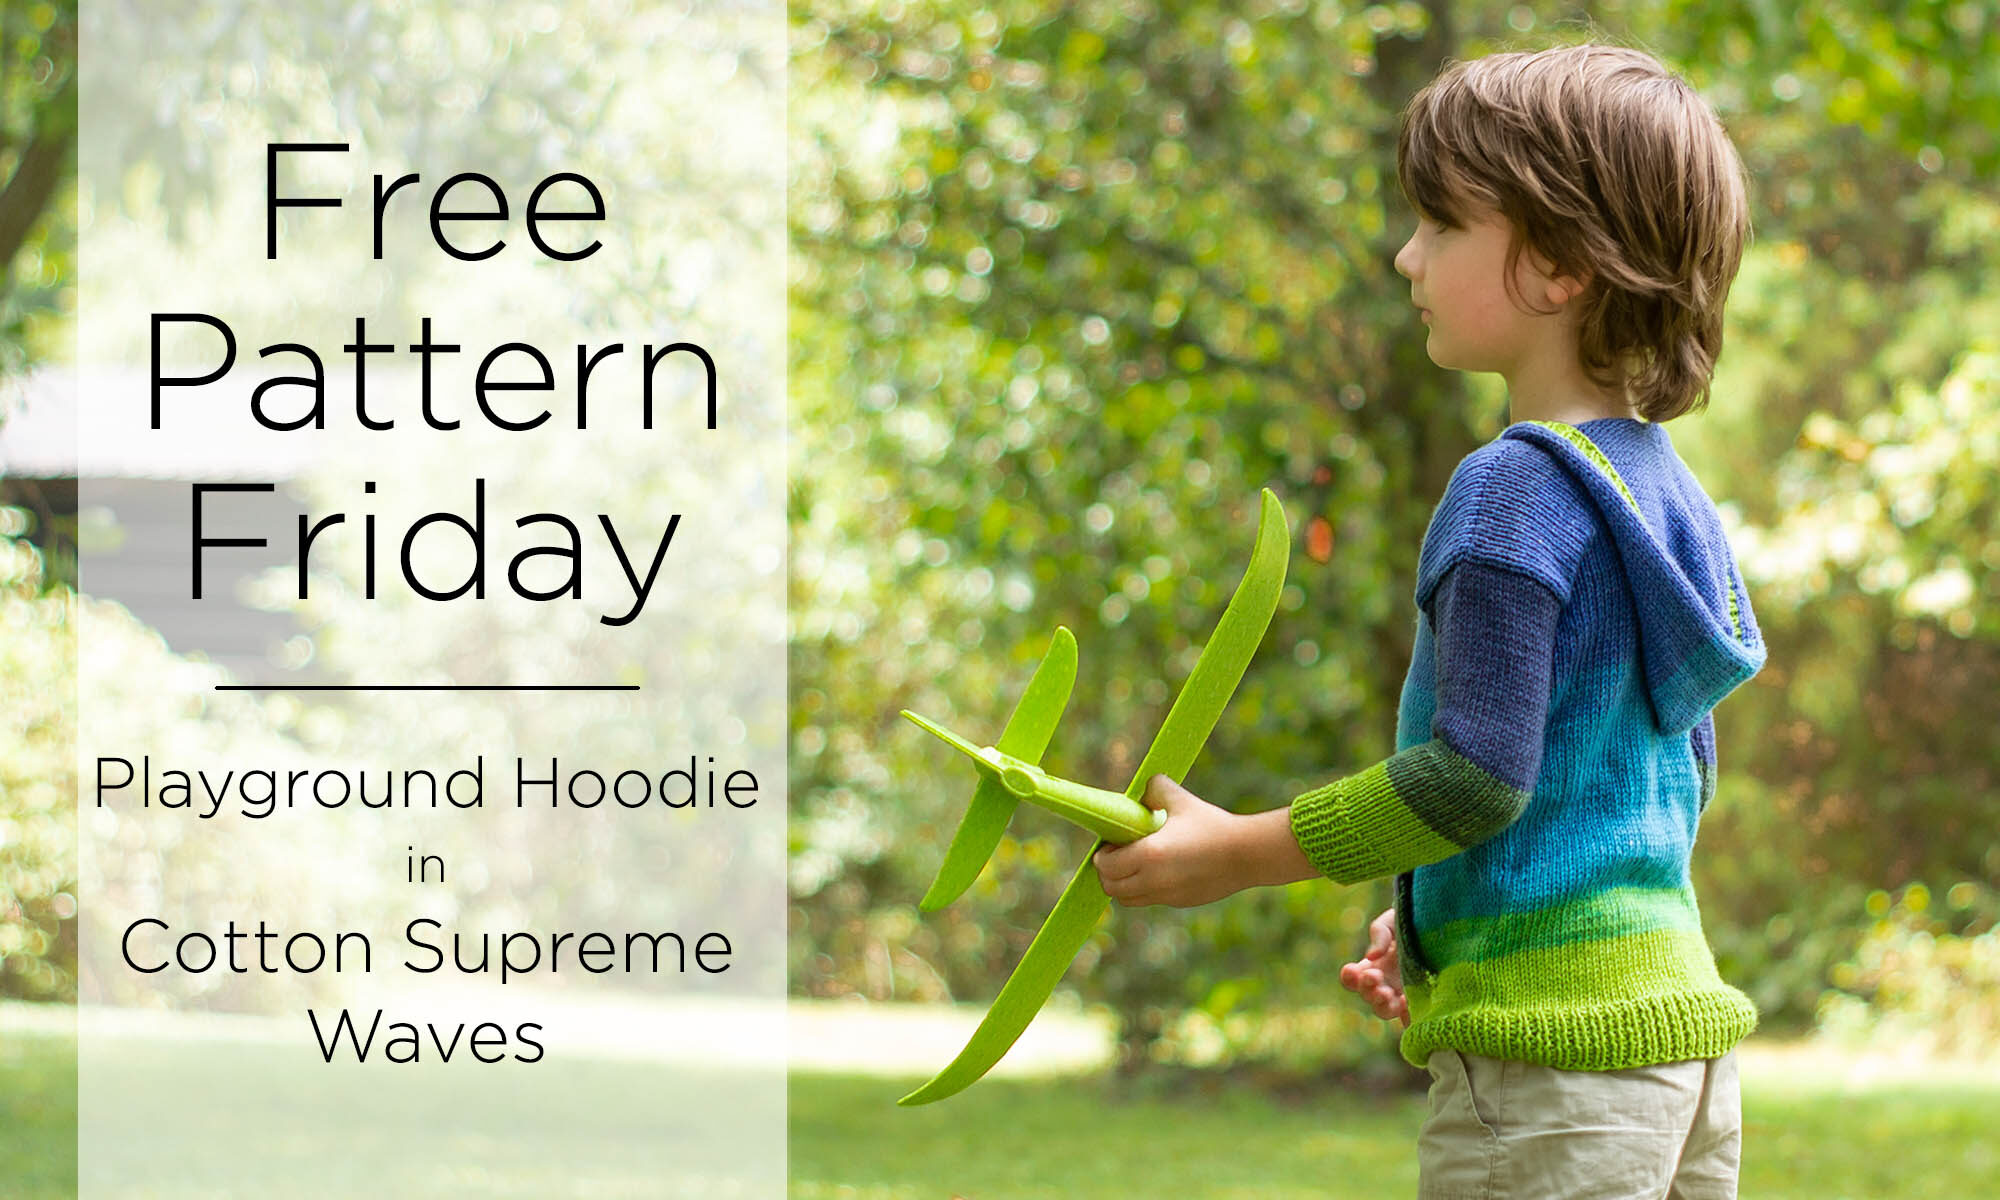 Child wearing striped knitted hoodie. Text reads. Free Pattern Friday, Playground Hoodie in Cotton Supreme Waves